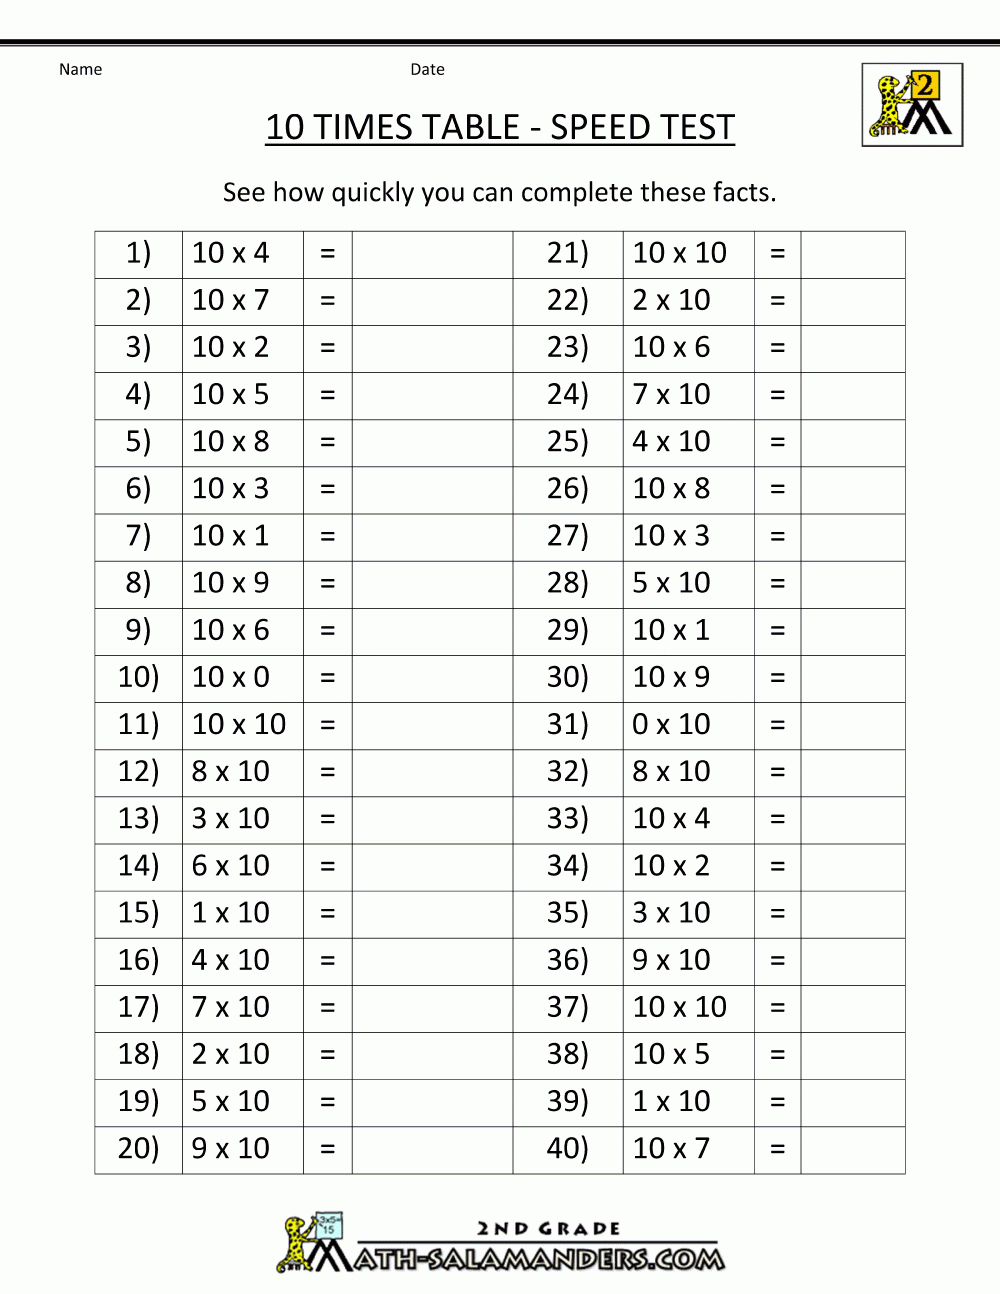 Multiplication Drill Sheets 10 Times Table Speed Test | For My - Free Printable Multiplication Speed Drills